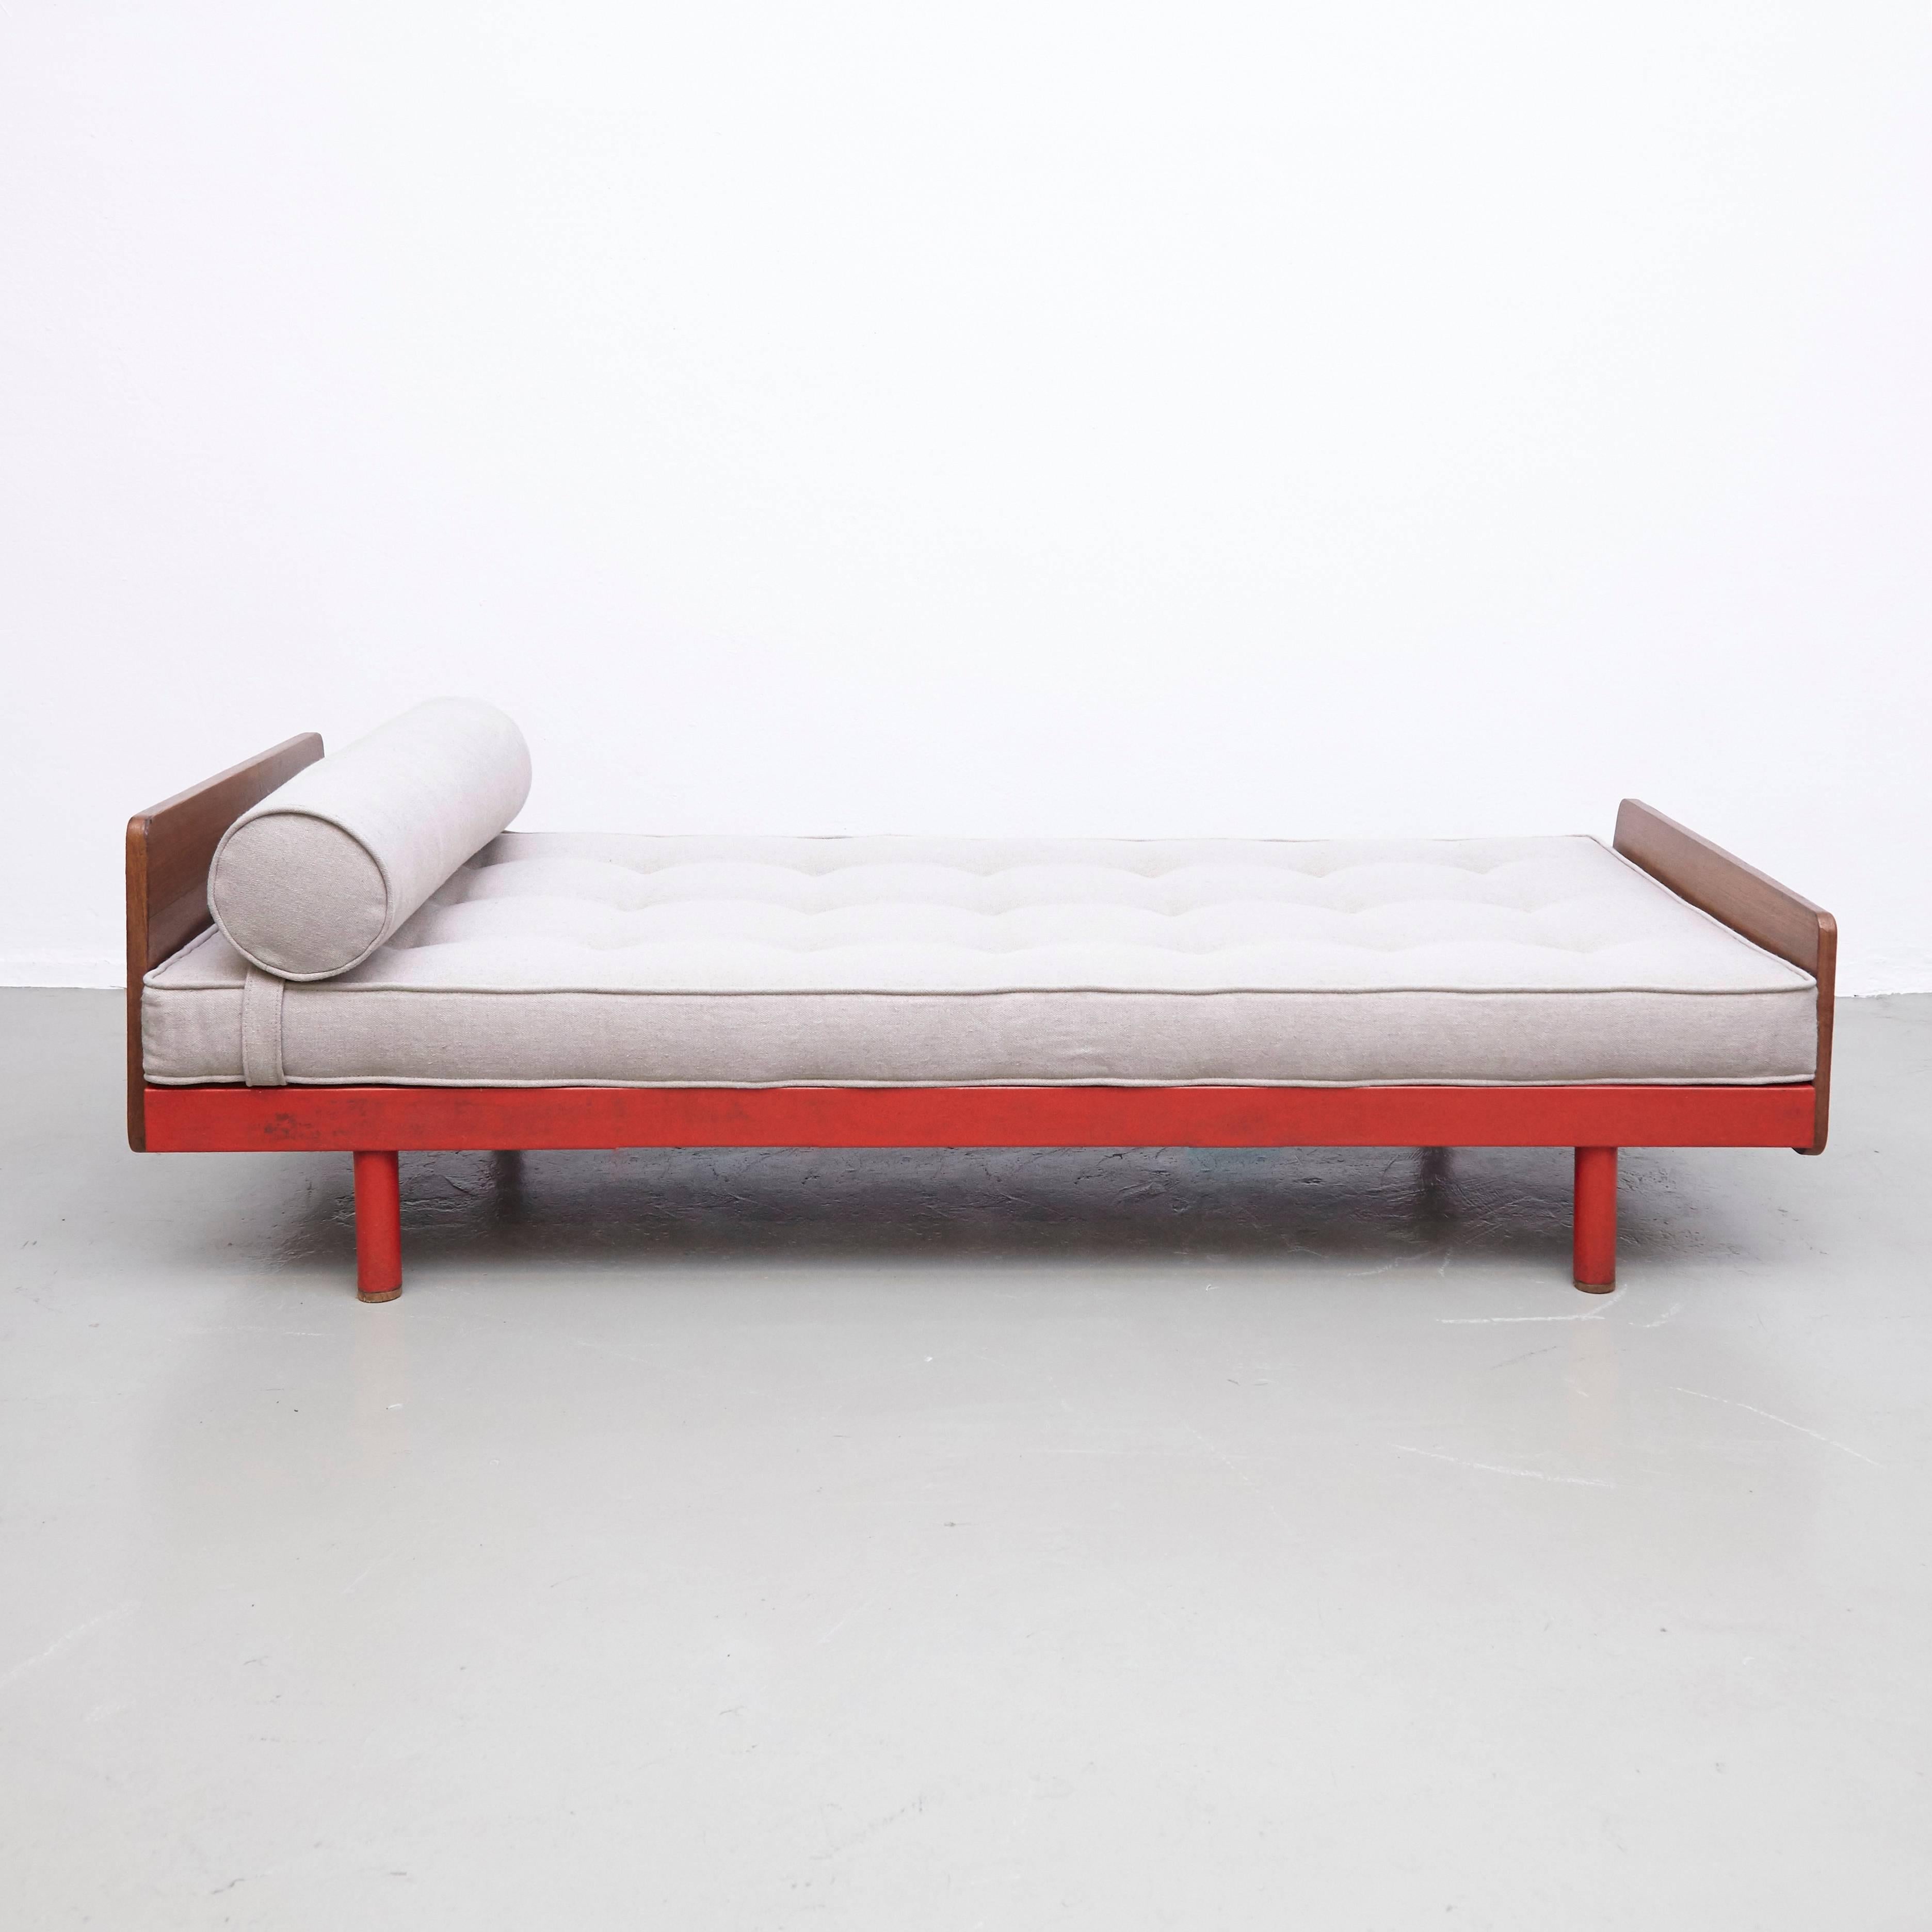 S.C.A.L. daybed designed by Jean Prouve.
Manufactured by Ateliers Prouve, France, circa 1950.
This bed has been restored.
Metal frame, wood, new upholstery.

In good condition, with minor wear consistent with age and use, preserving a beautiful